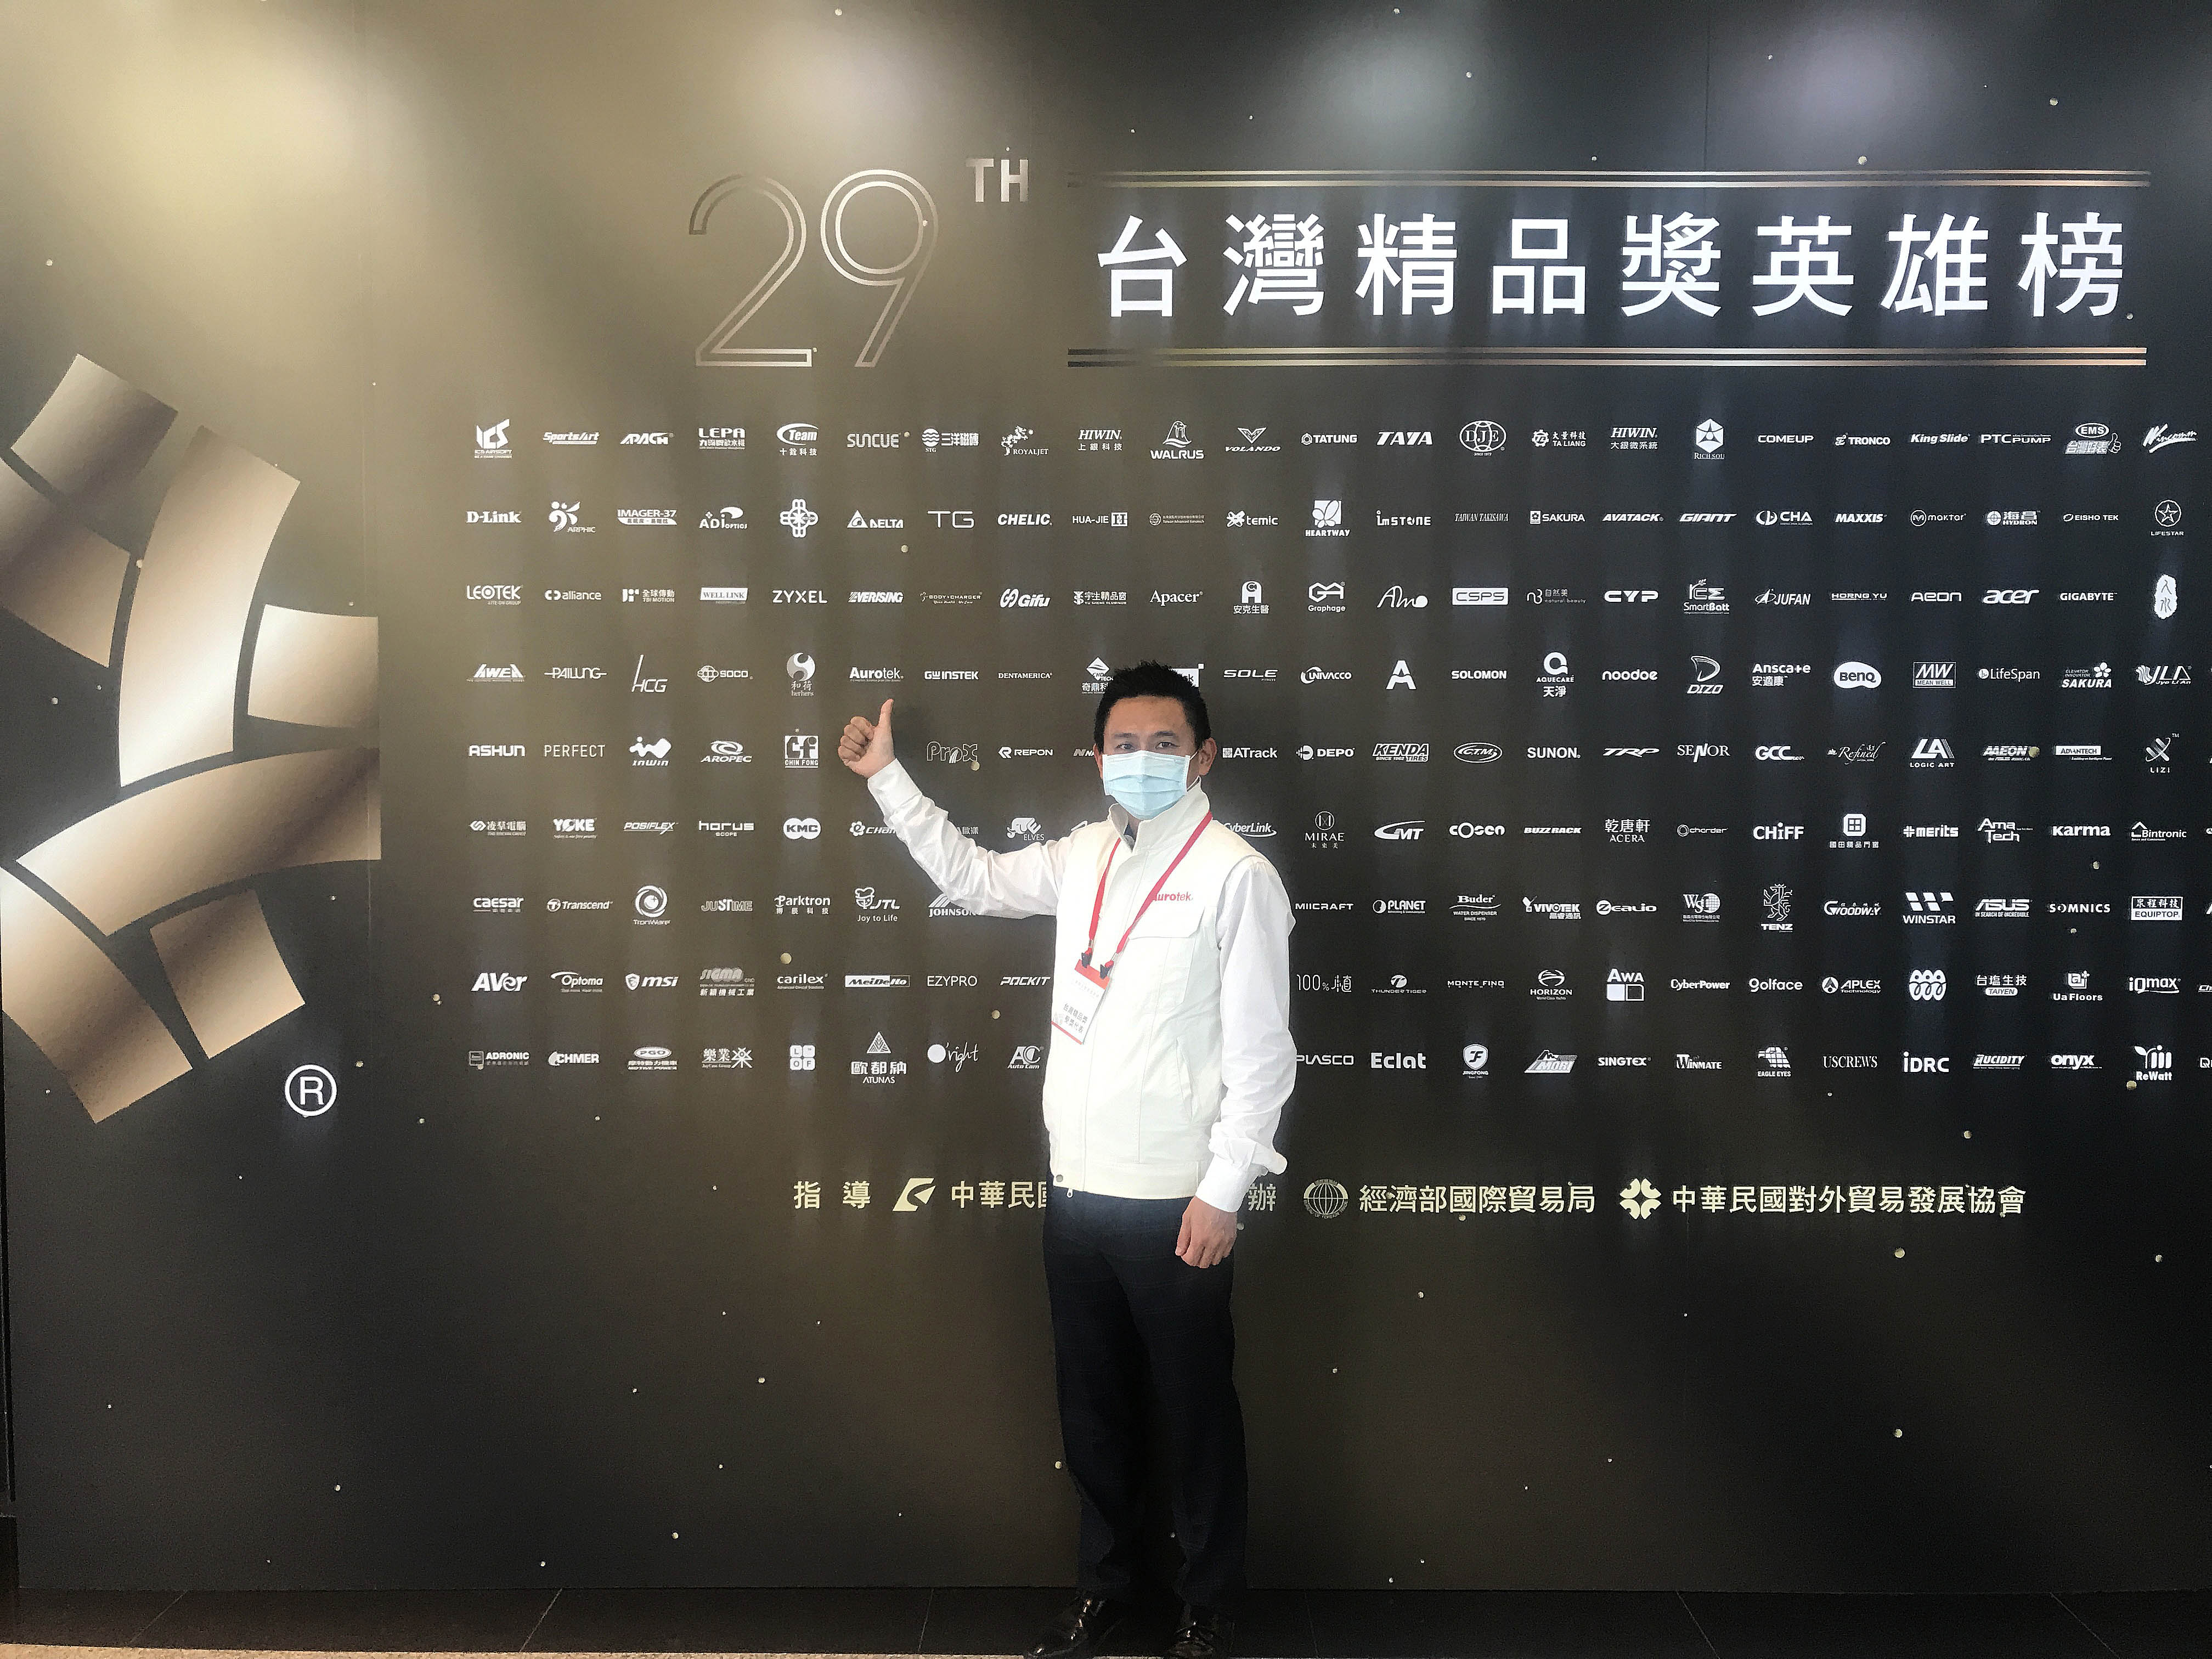 Electric Shutters 2 receives the "Symbol of Excellence, Taiwan".